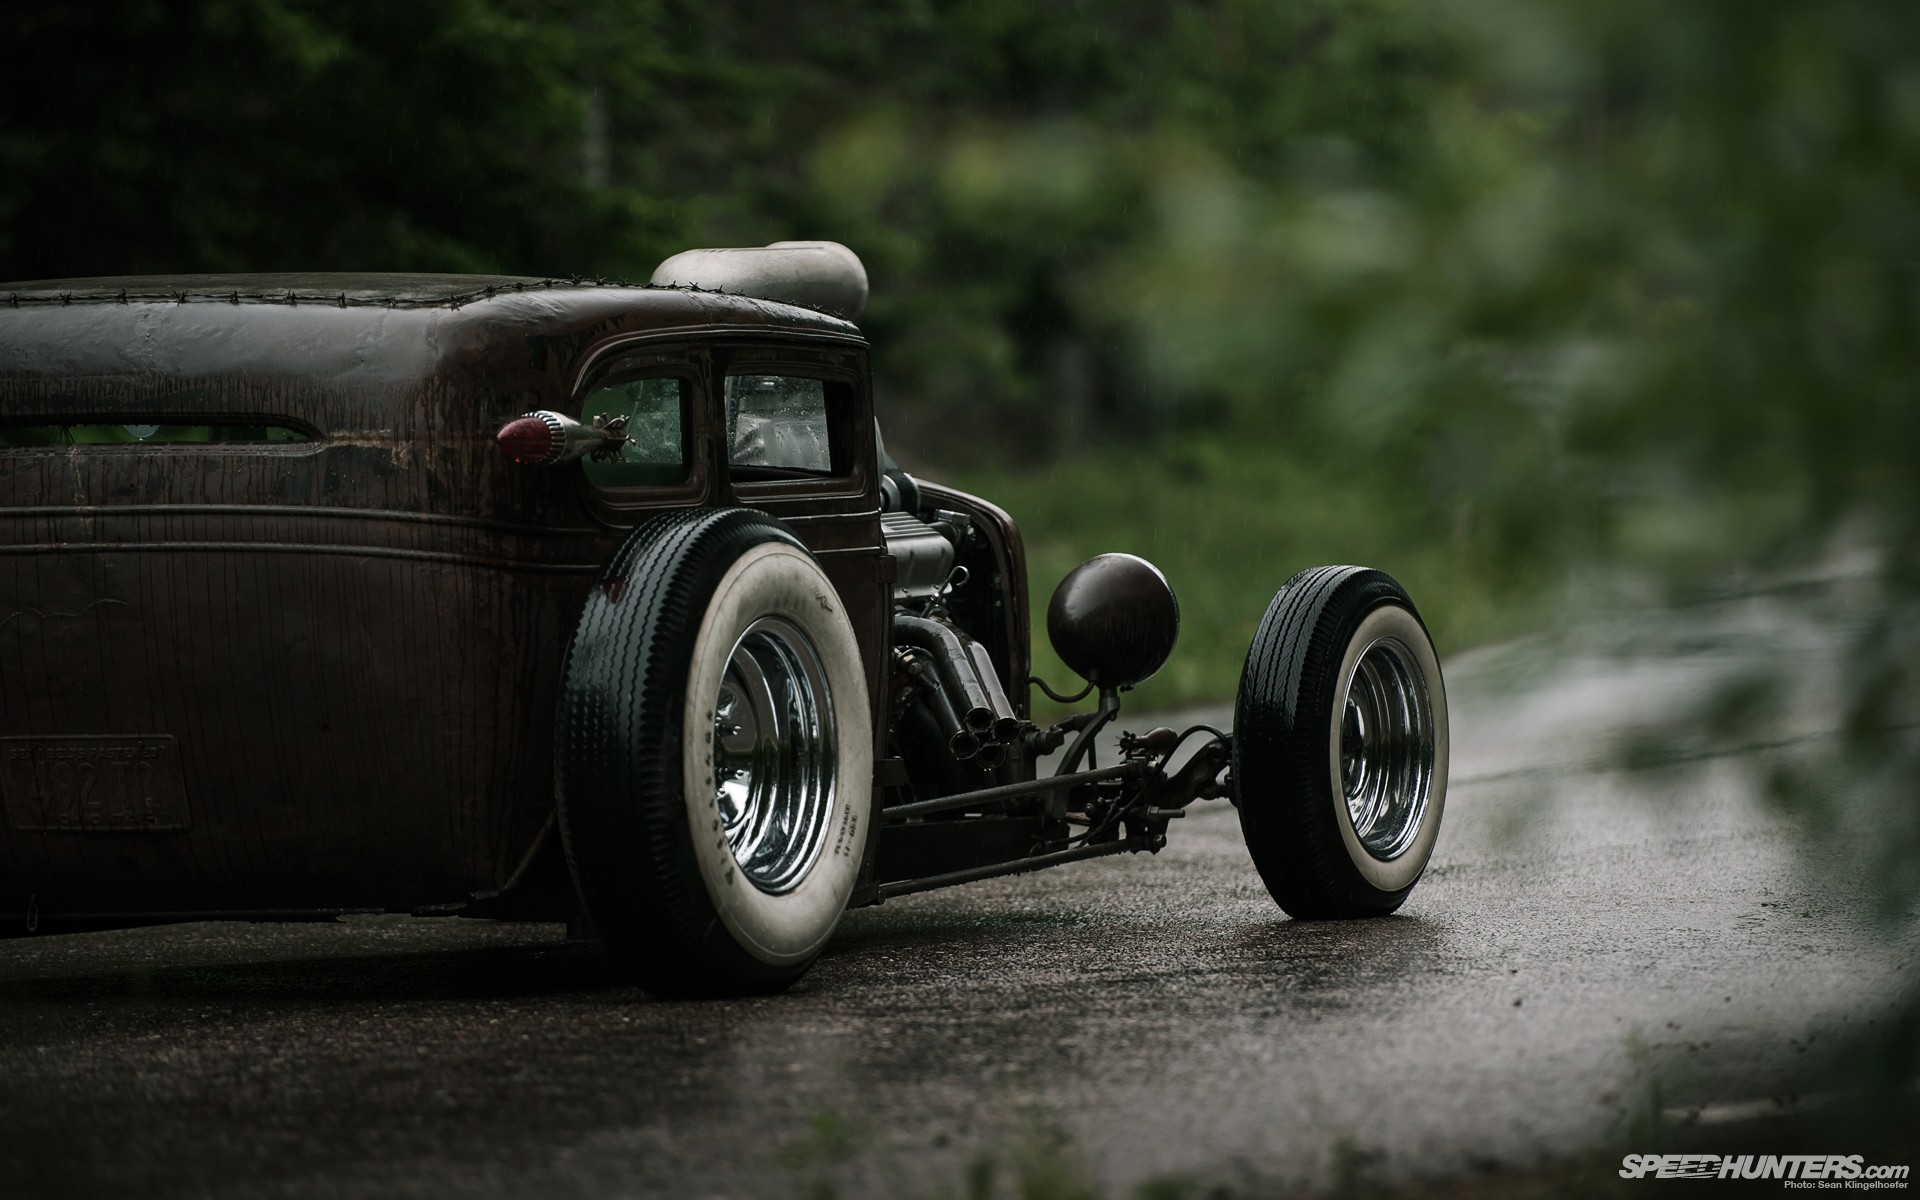 hot rod wallpapers